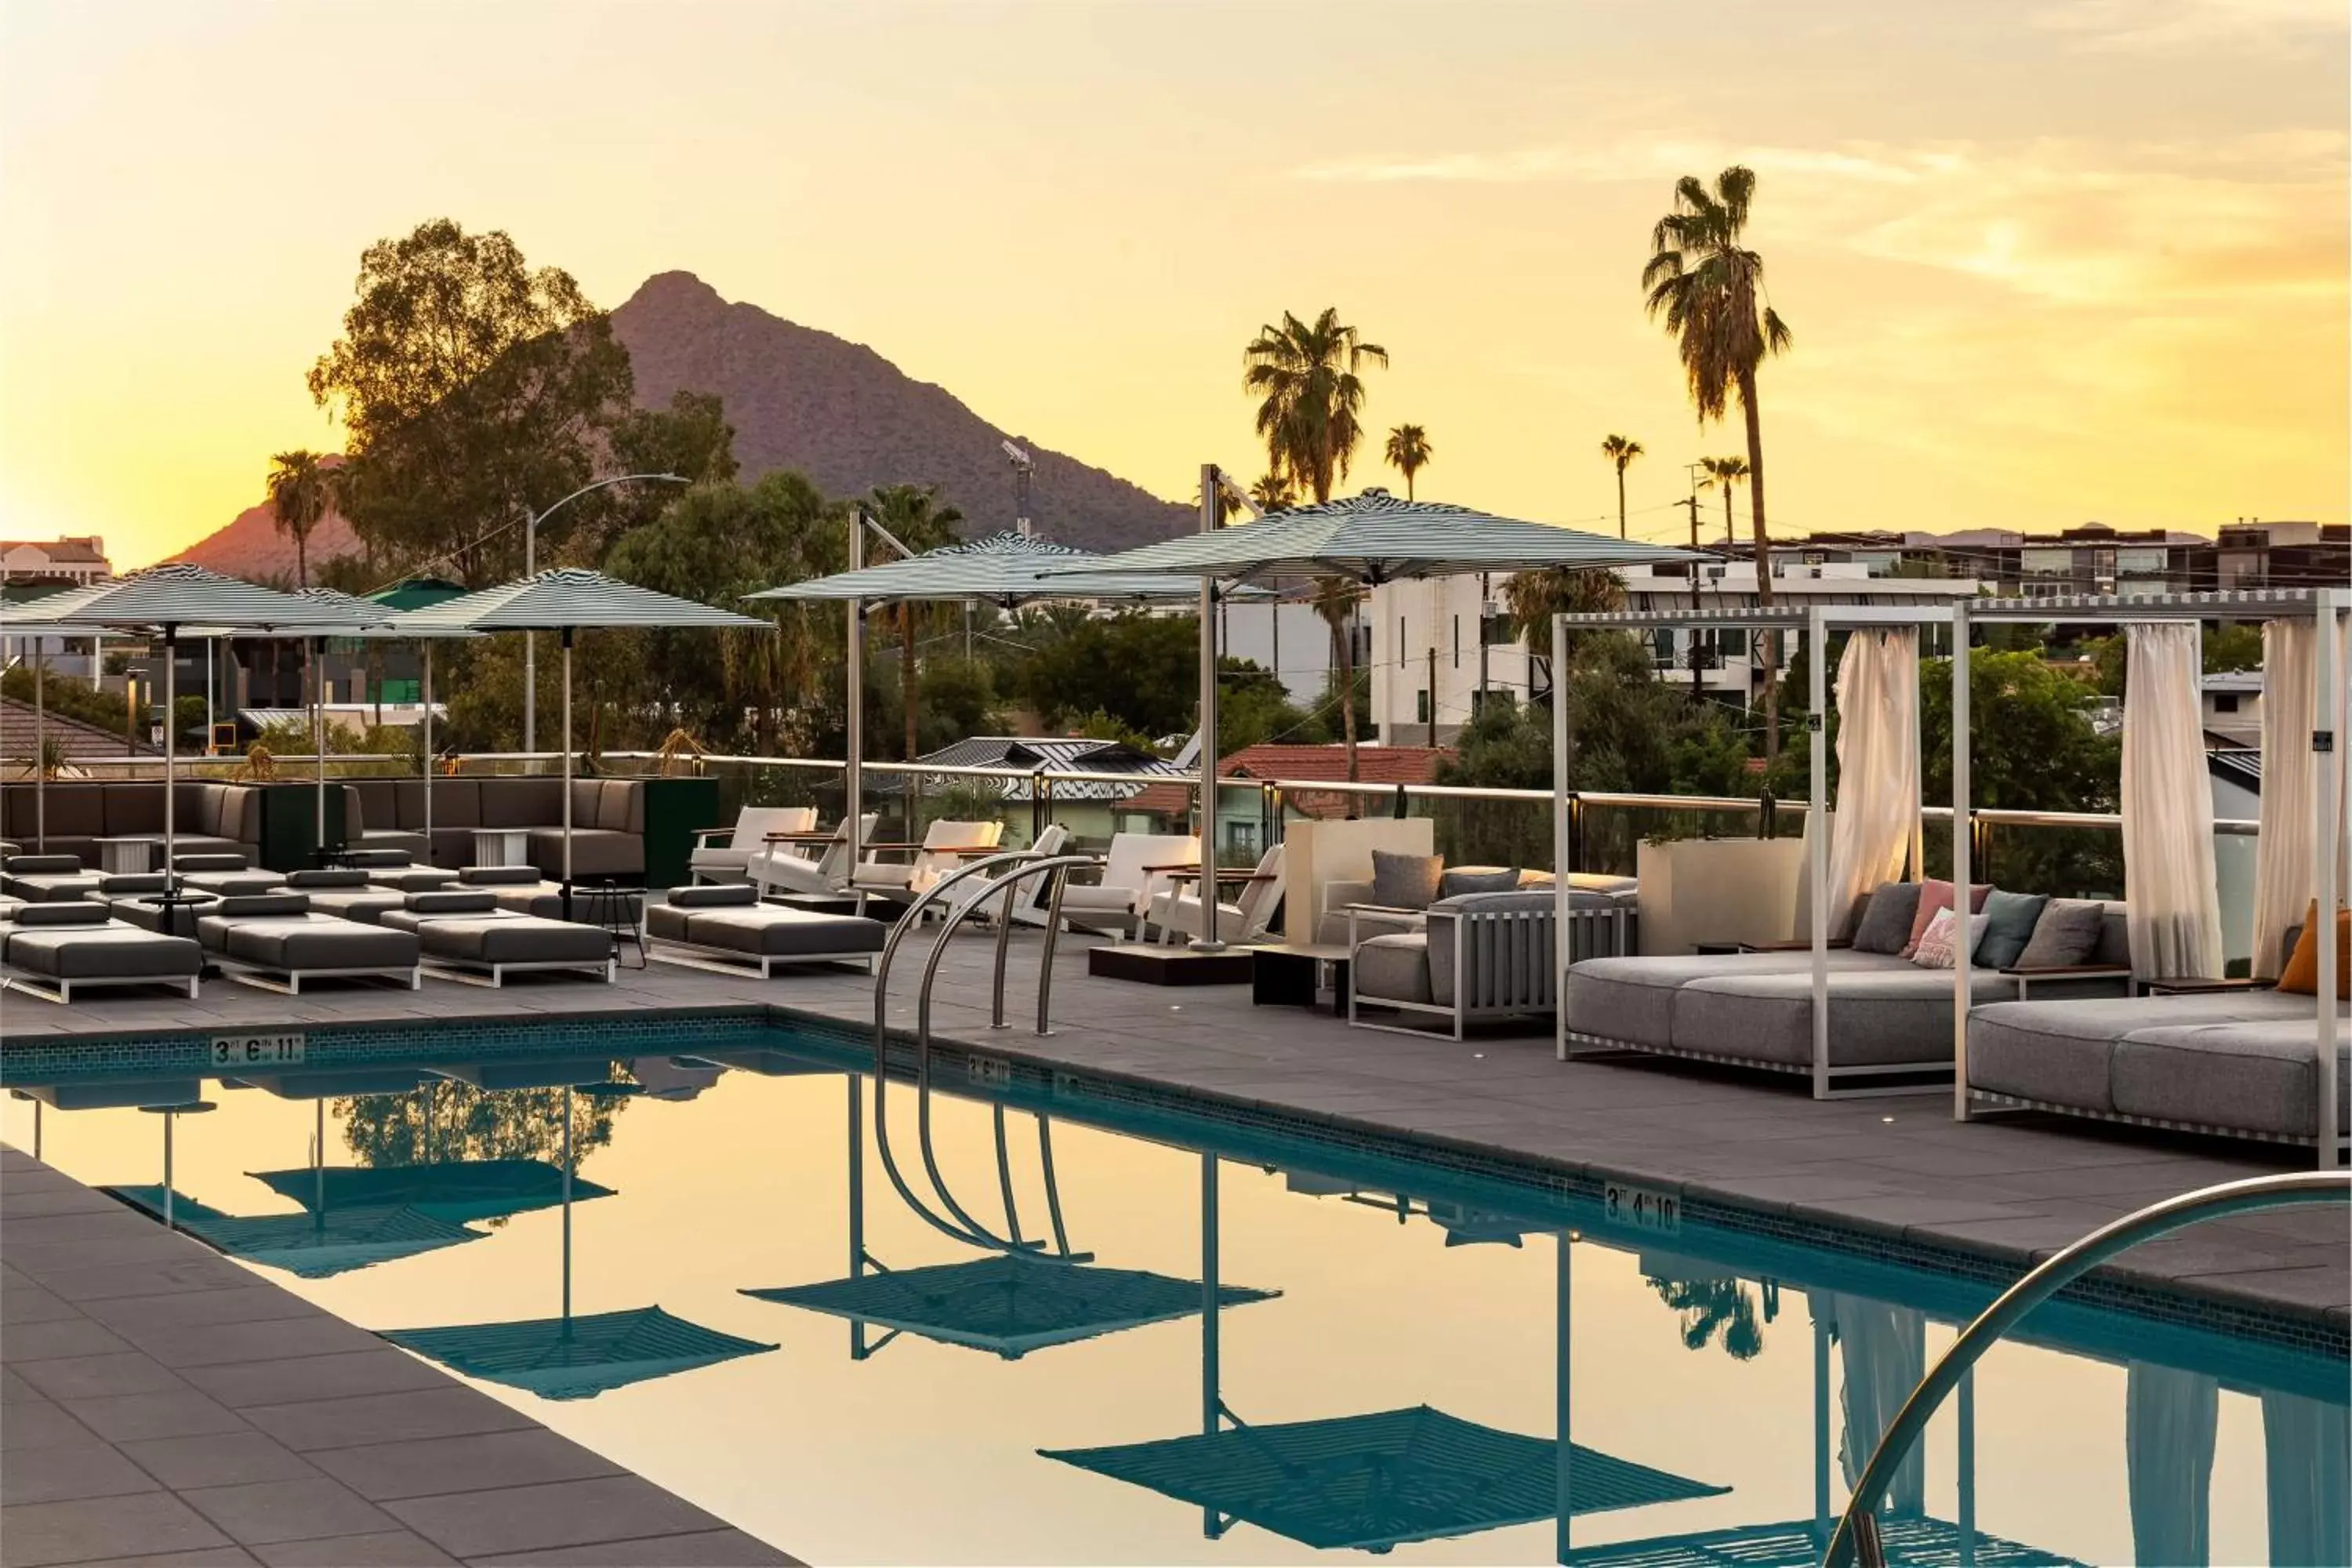 Swimming Pool in Senna House Hotel Scottsdale, Curio Collection By Hilton